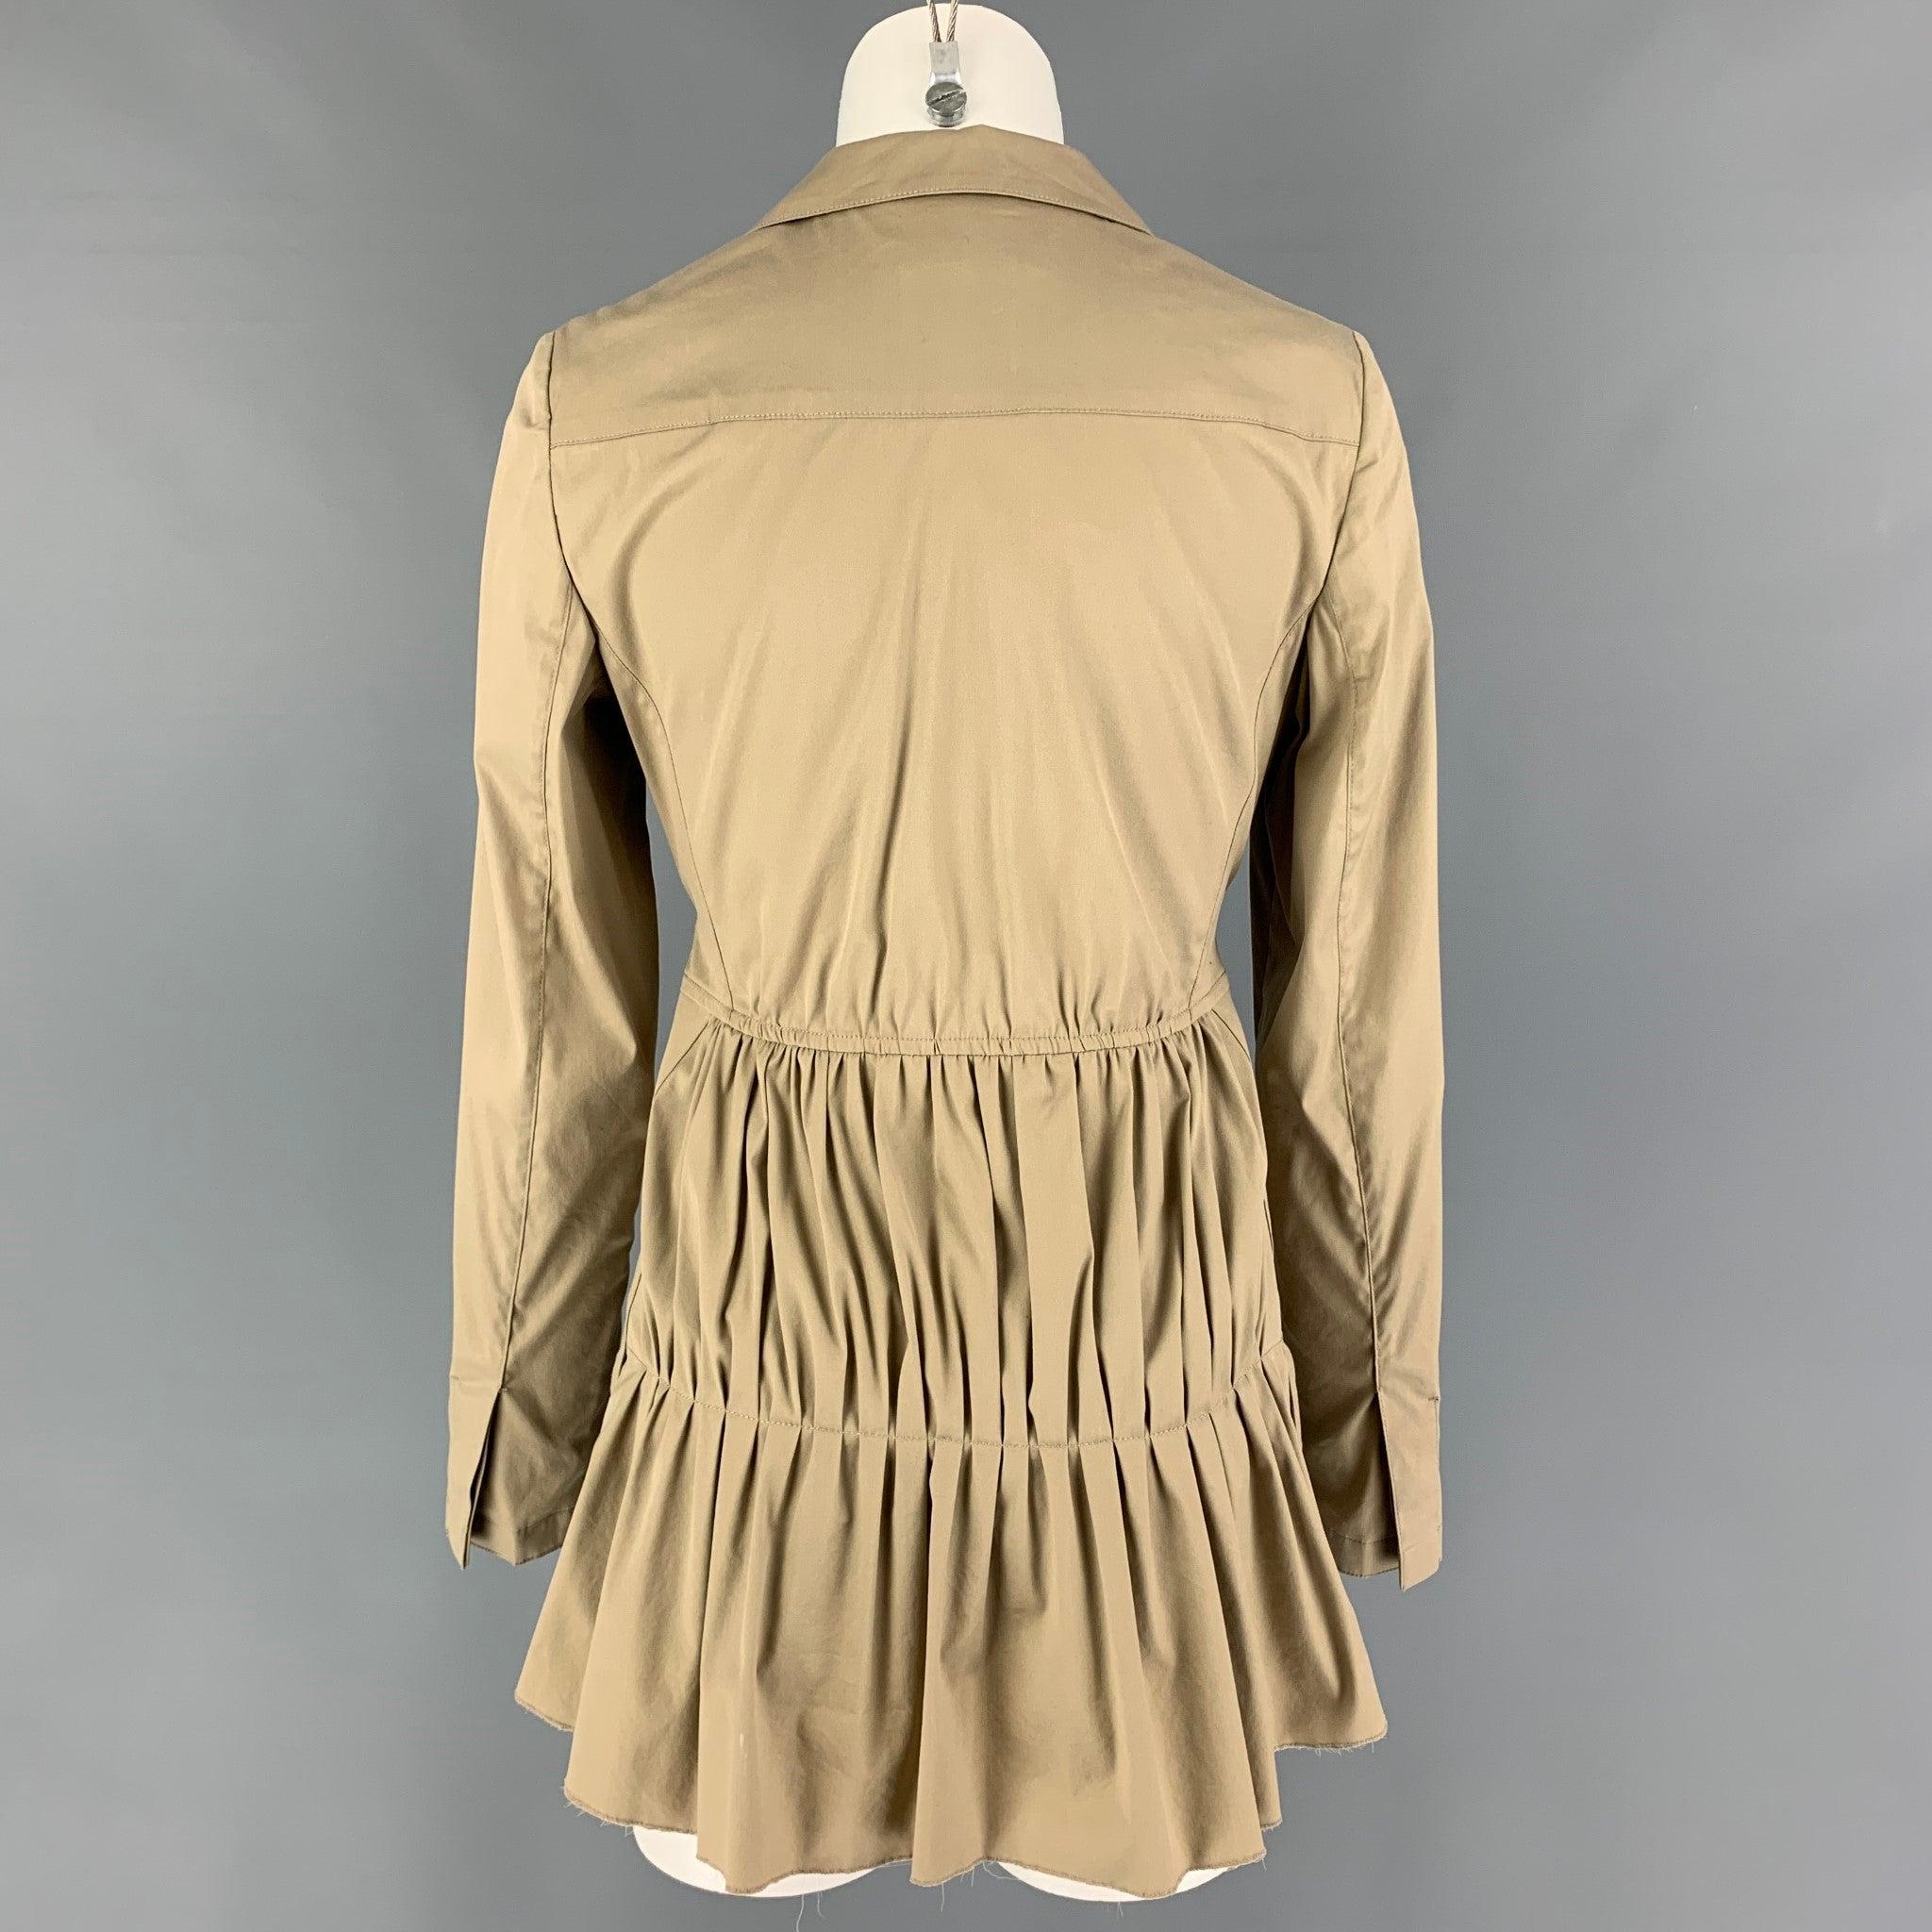 PRADA jacket comes in a beige cotton blend featuring a notch lapel, ruched back design, belted, raw hem, front pockets, and a hidden placket closure. Made in Italy.
Excellent
Pre-Owned Condition. 

Marked:   40 

Measurements: 
 
Shoulder: 15 inches